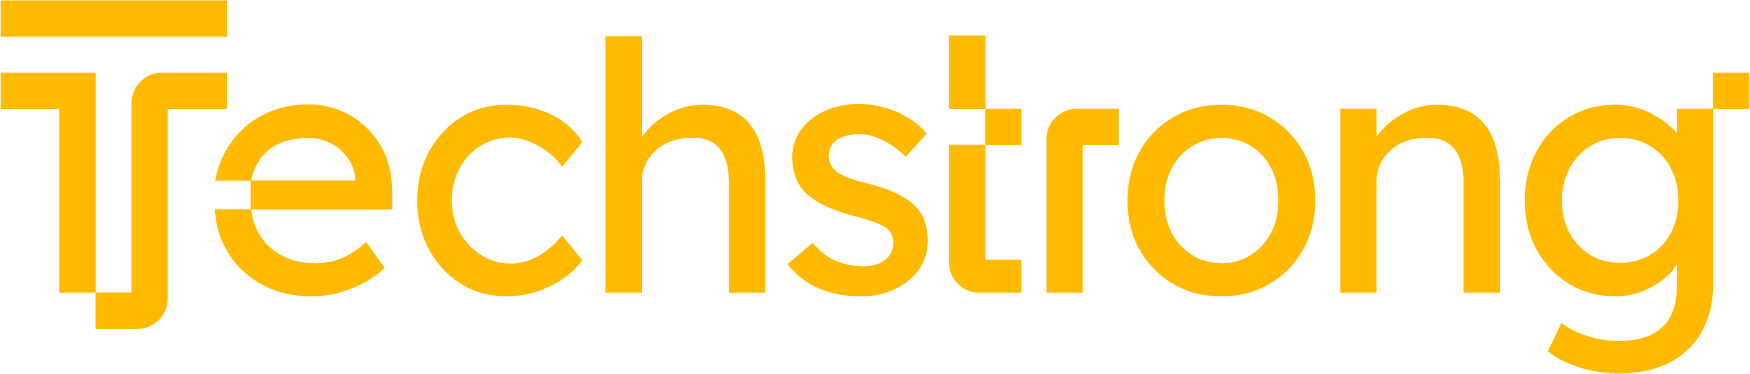 A yellow and black logo for TechStrong.